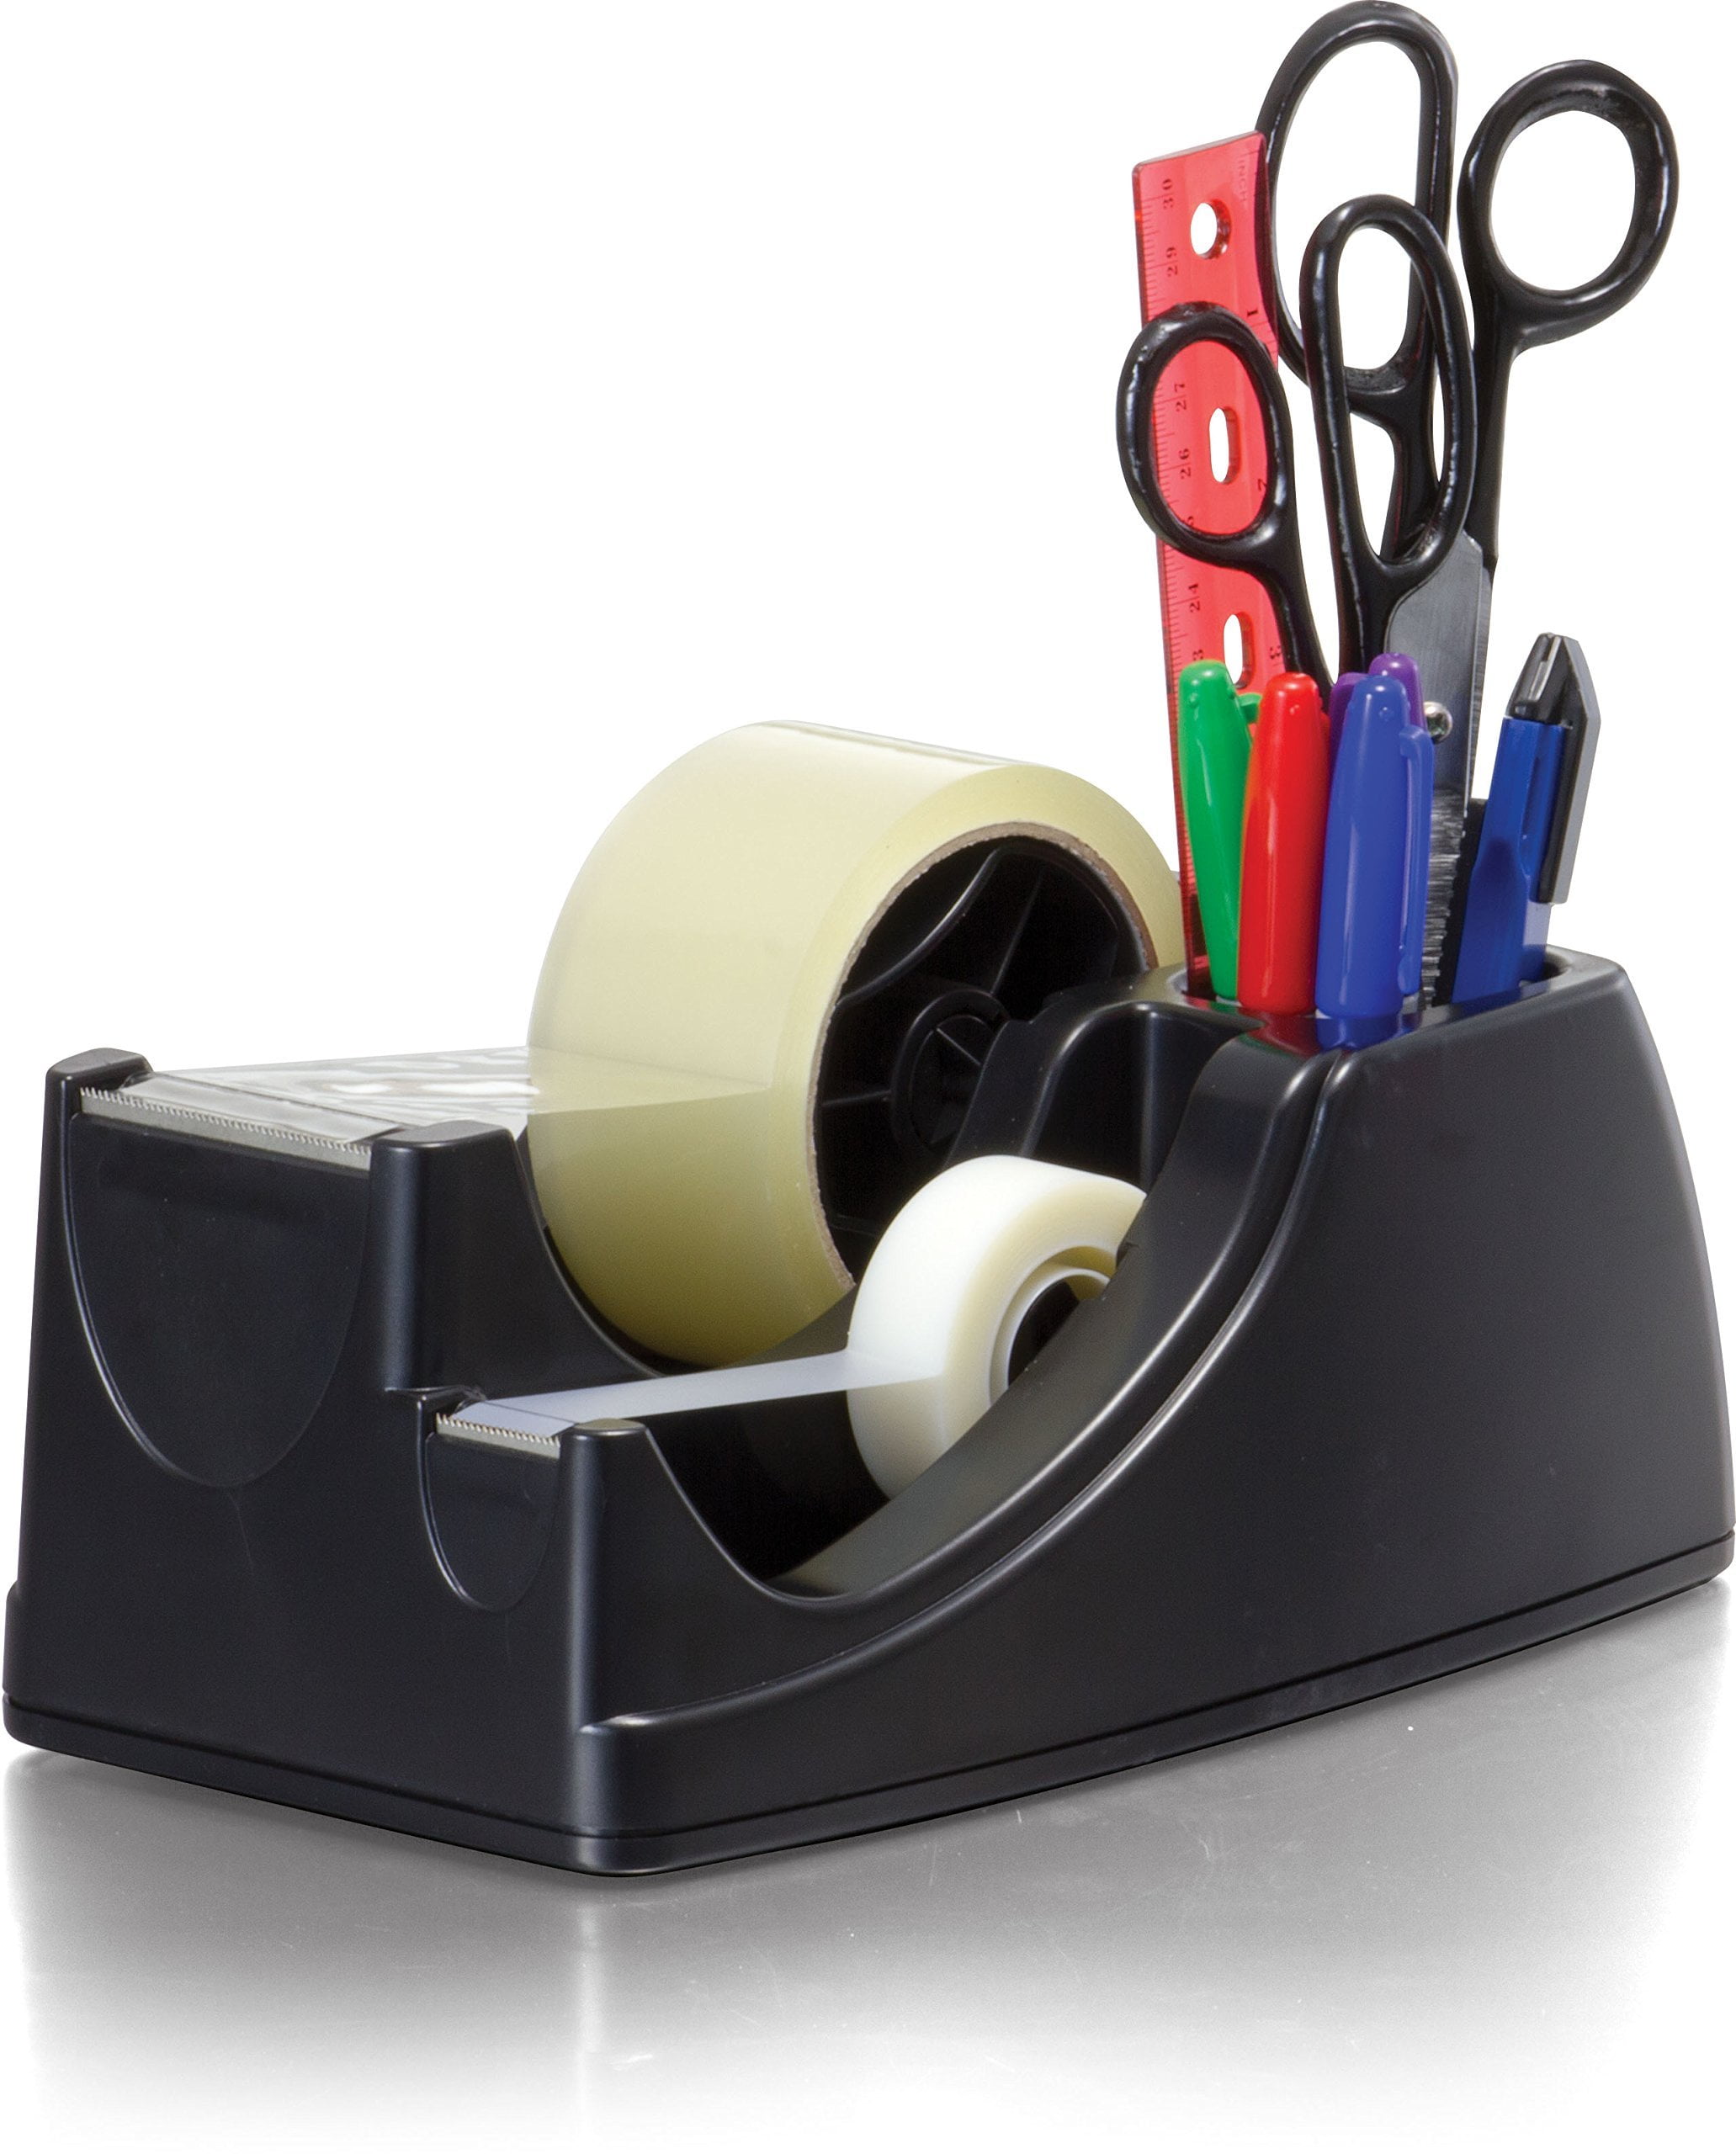 Buy 50mm/ 5.08 cm (2 inch) Tape Dispenser (Metal Body) Online at Low Prices  in India 